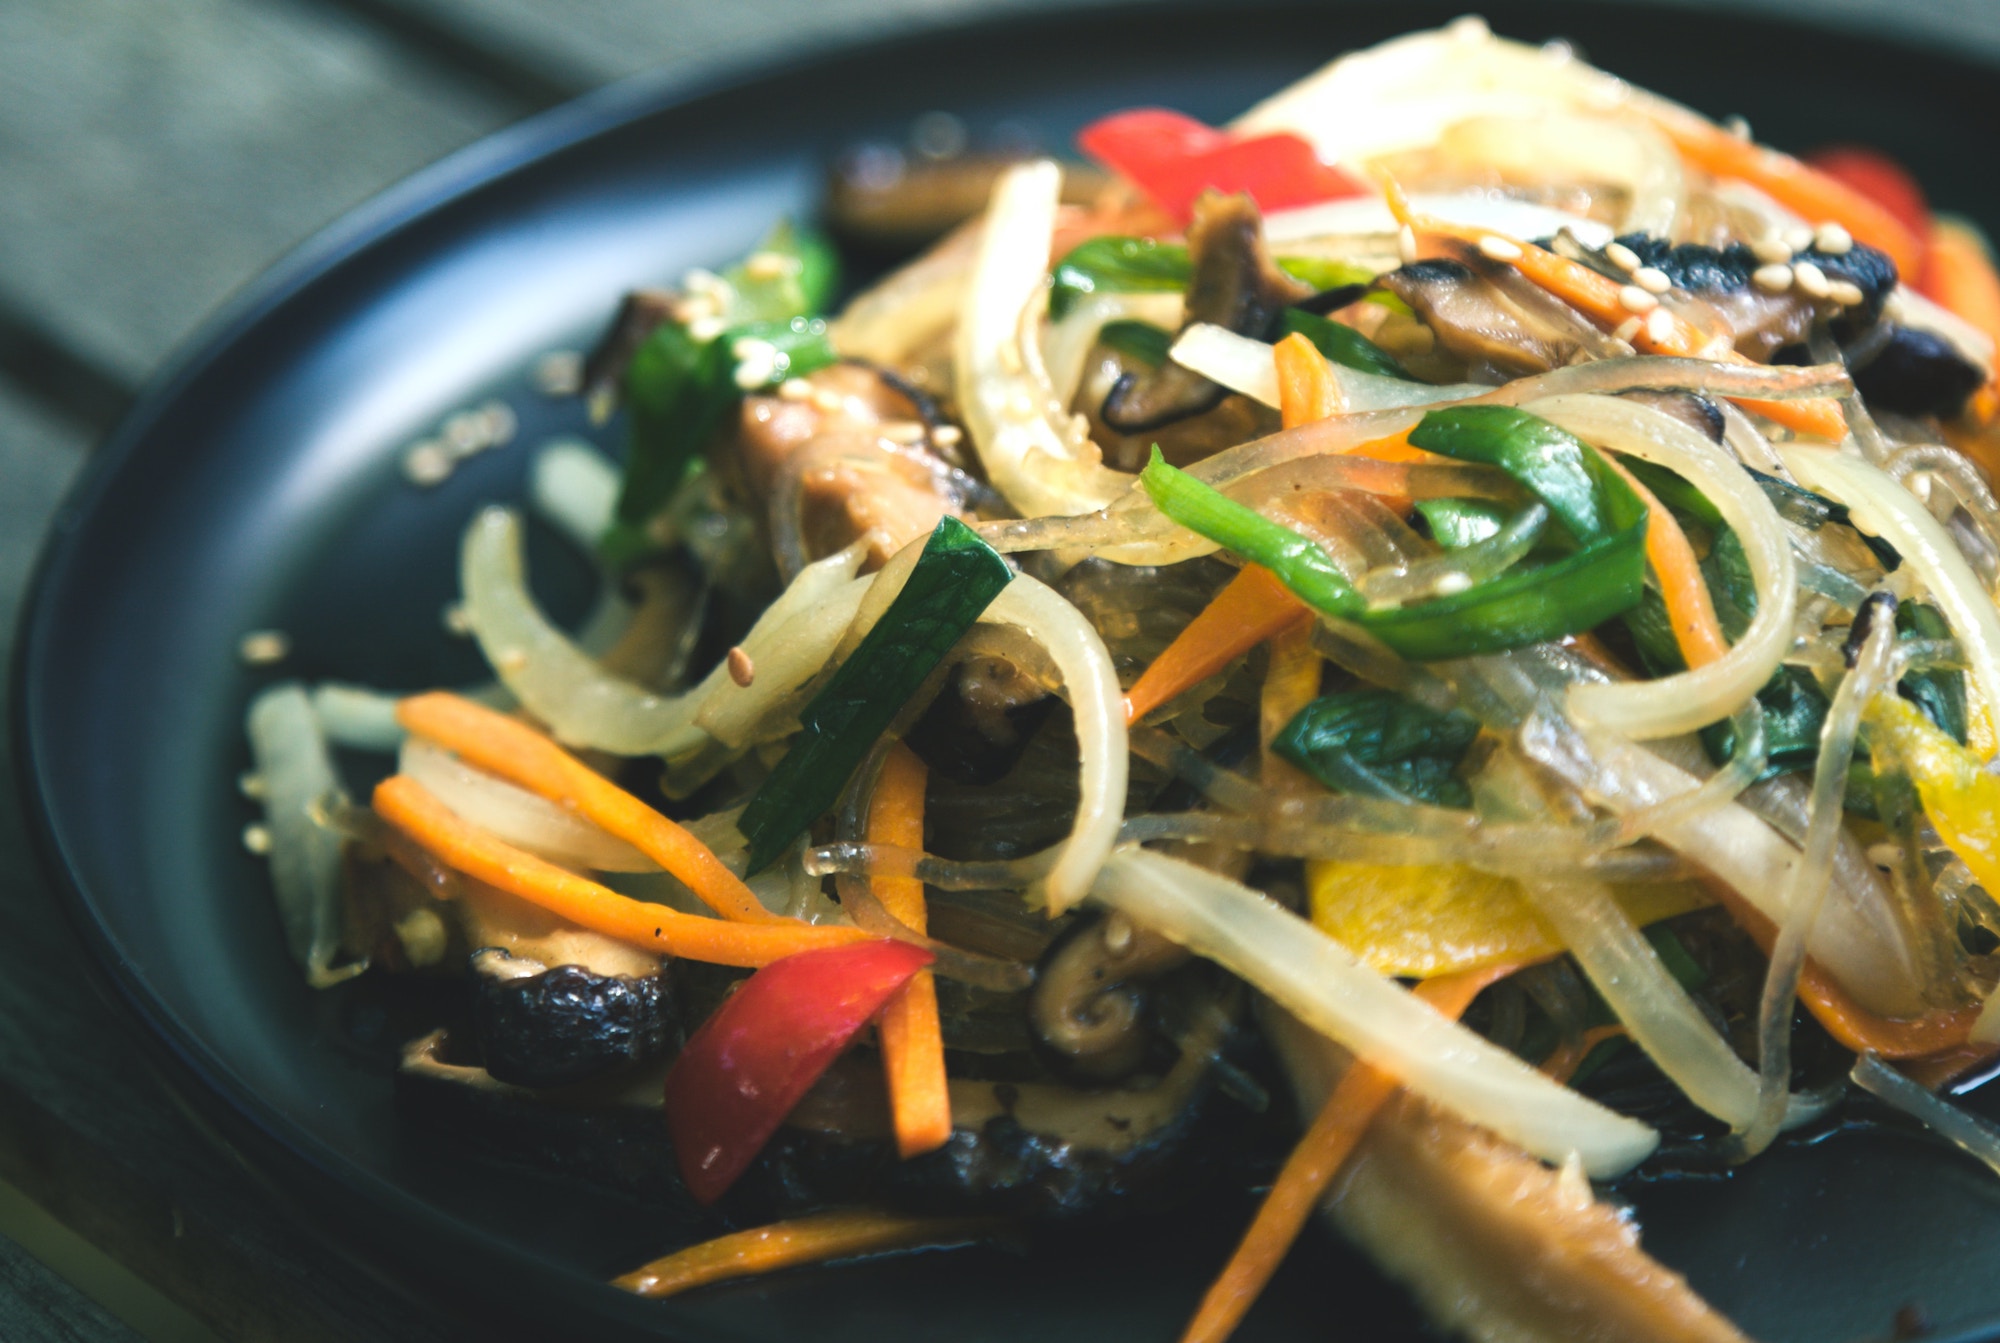 A colorful dish of glass noodles and vegetables sits on a dark colored plate